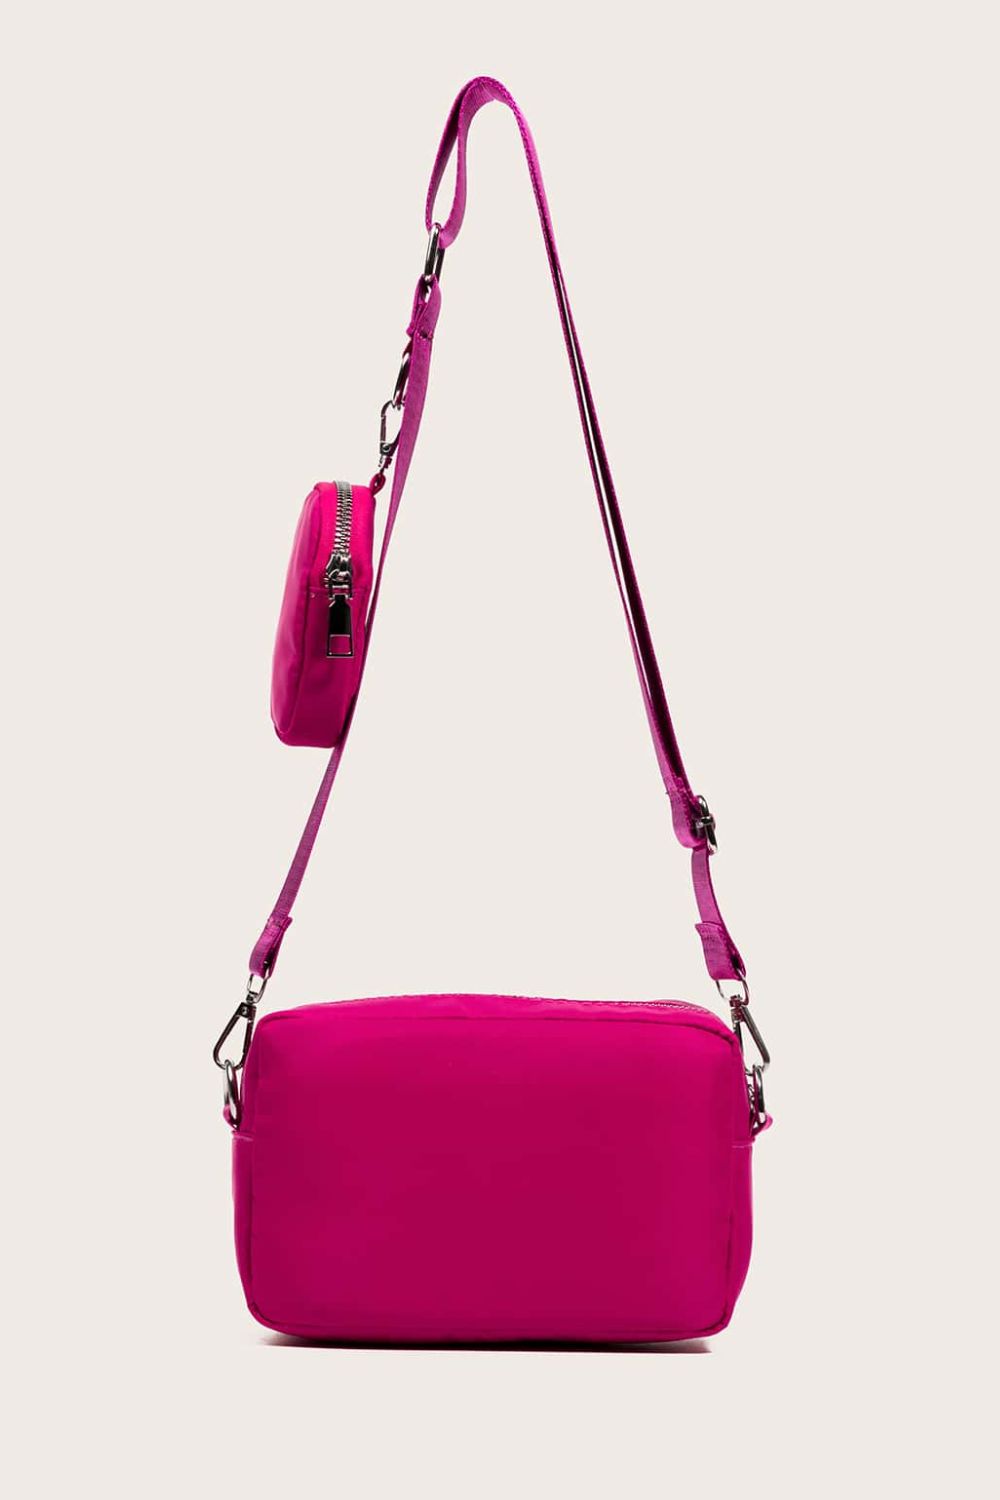 polyester shoulder handbag with small purse, cerise, white background